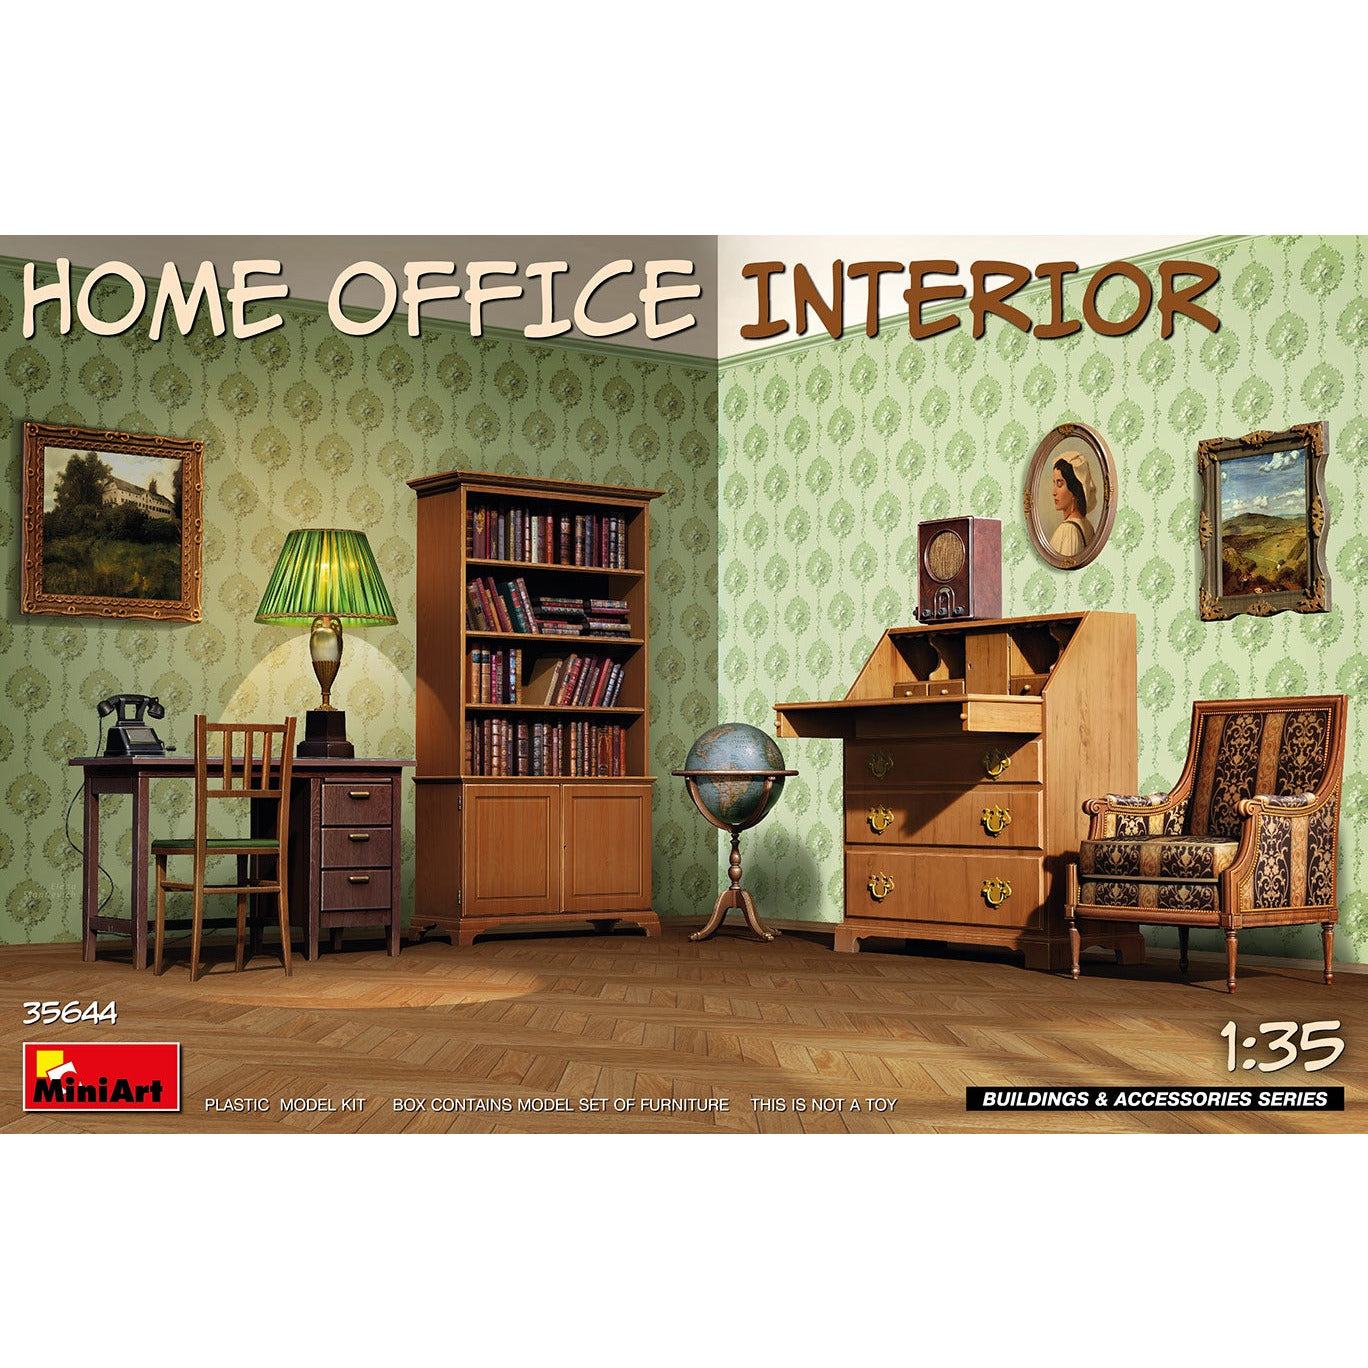 Home Office Interior #35644 1/35 Scenery Kit by MiniArt